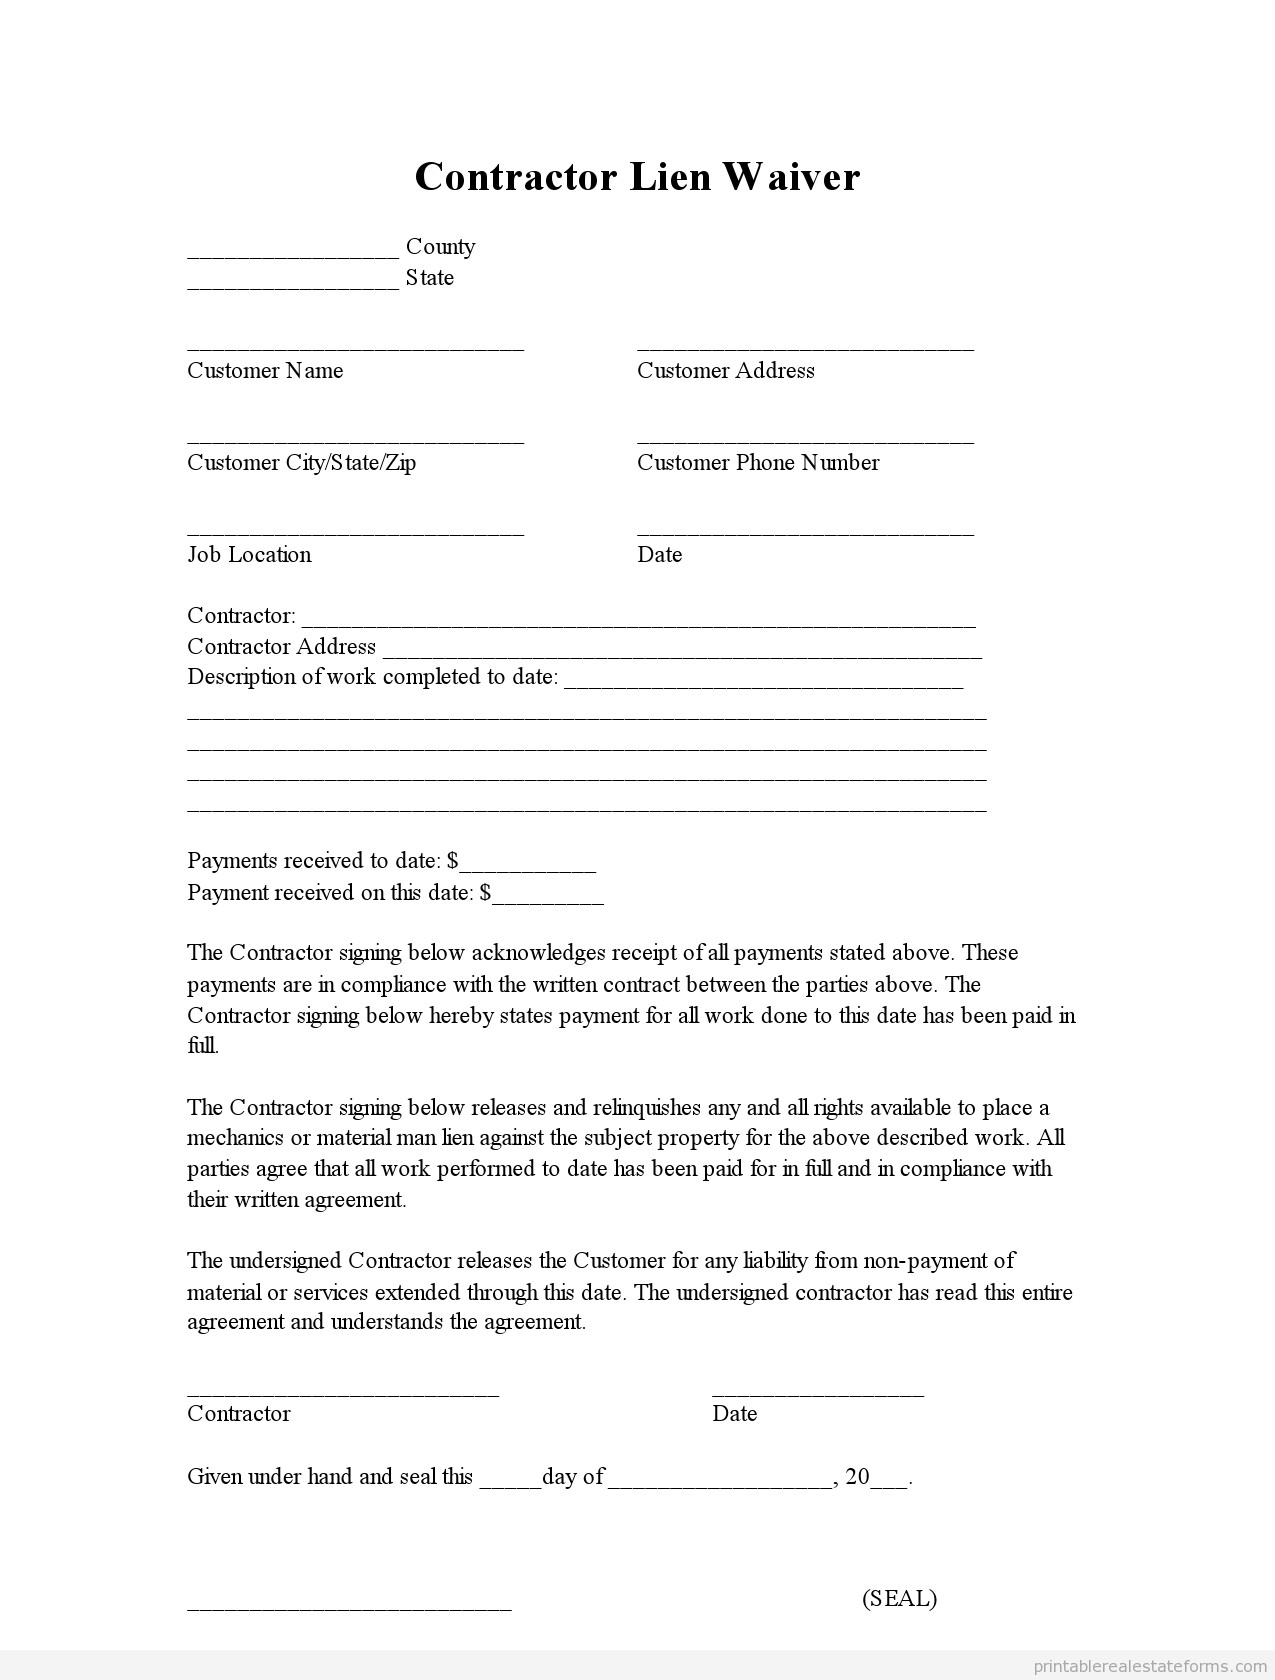 Colorado Workers Comp Waiver form Sample Printable Contractor Lien Waiver form